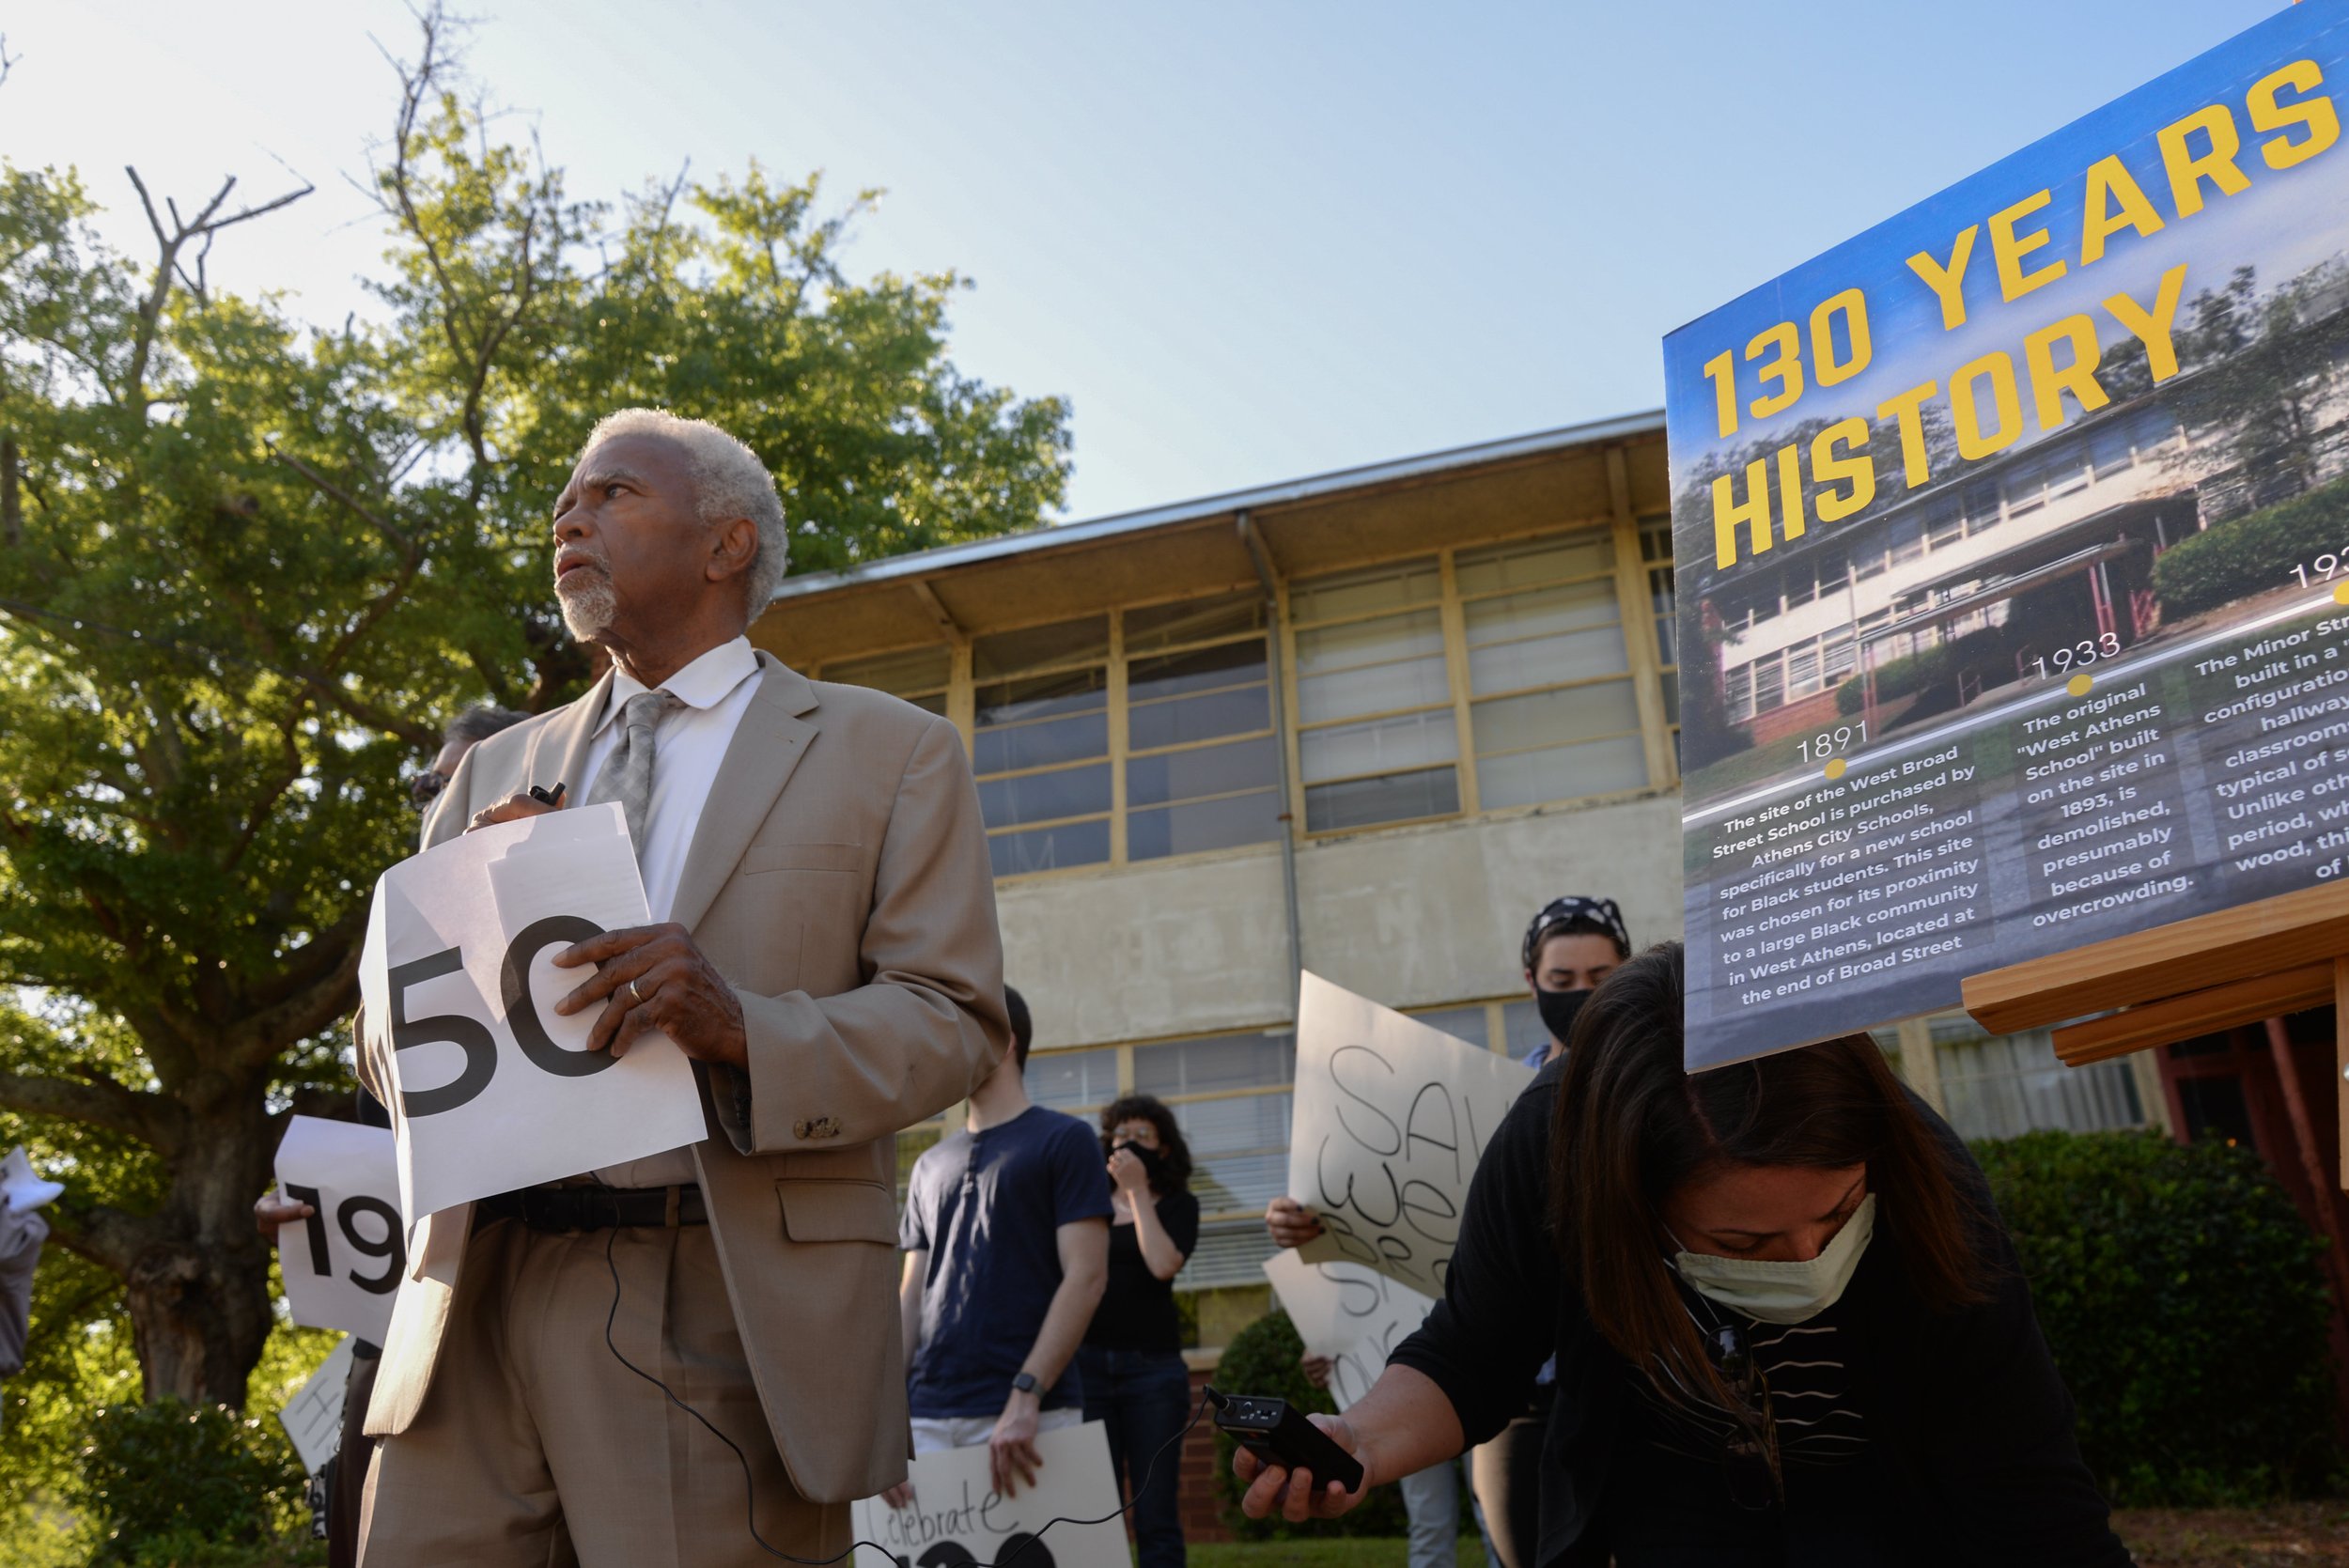  Fred Smith, a member of a community committee that is working with the school board to advise on the fate of the West Broad Street School, prepares to speak at a demonstration of support for the historic structure on Thursday, May 13, 2021 in Athens